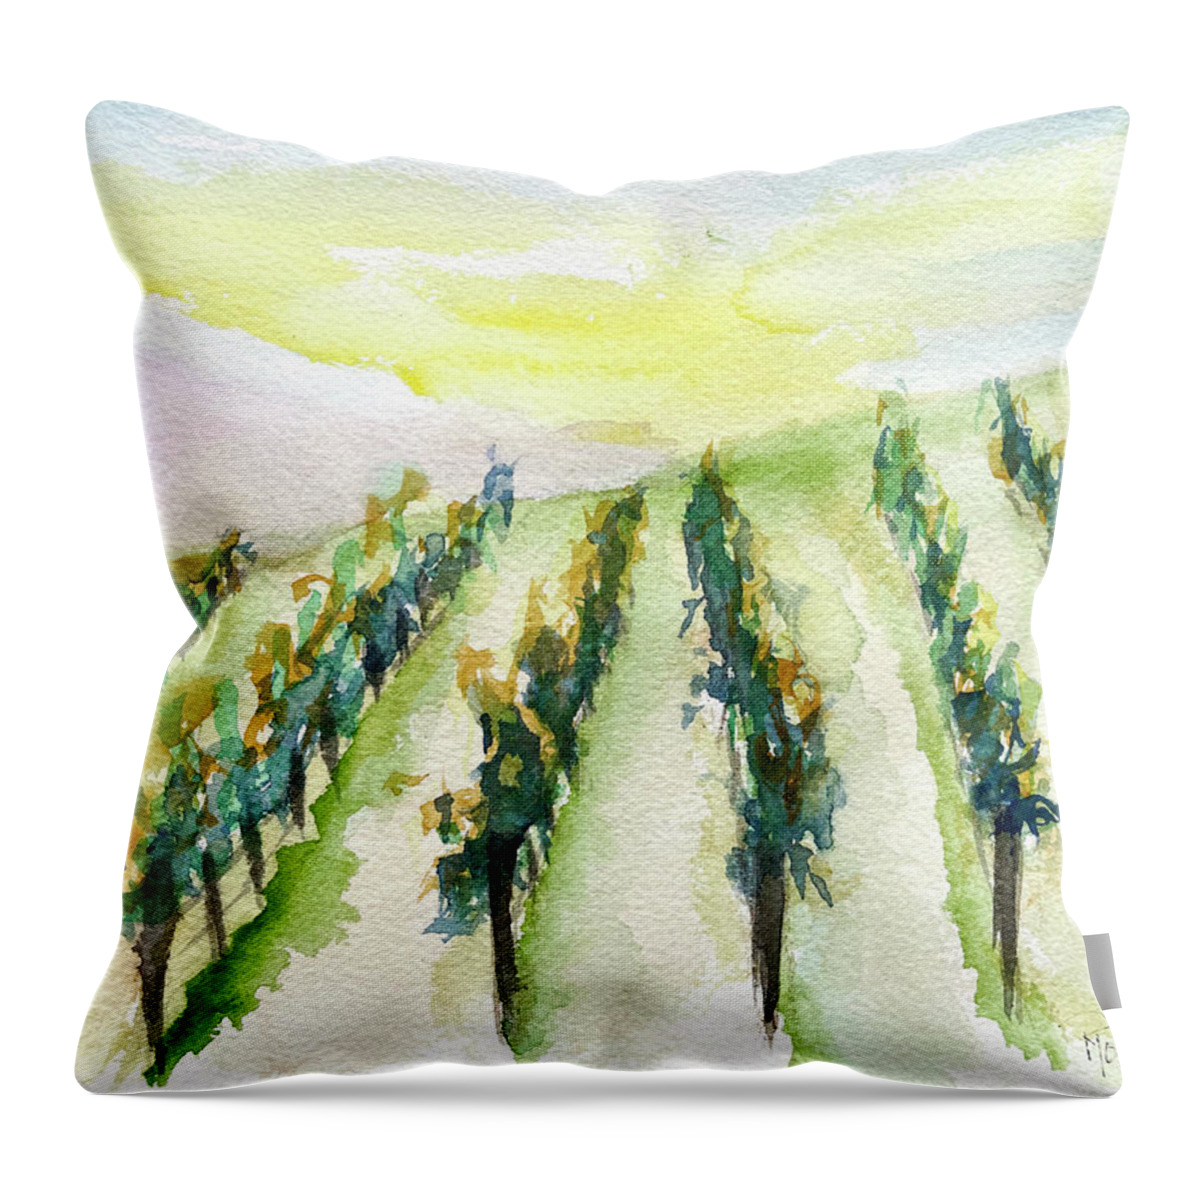 Temecula Throw Pillow featuring the painting Morning Vines by Roxy Rich